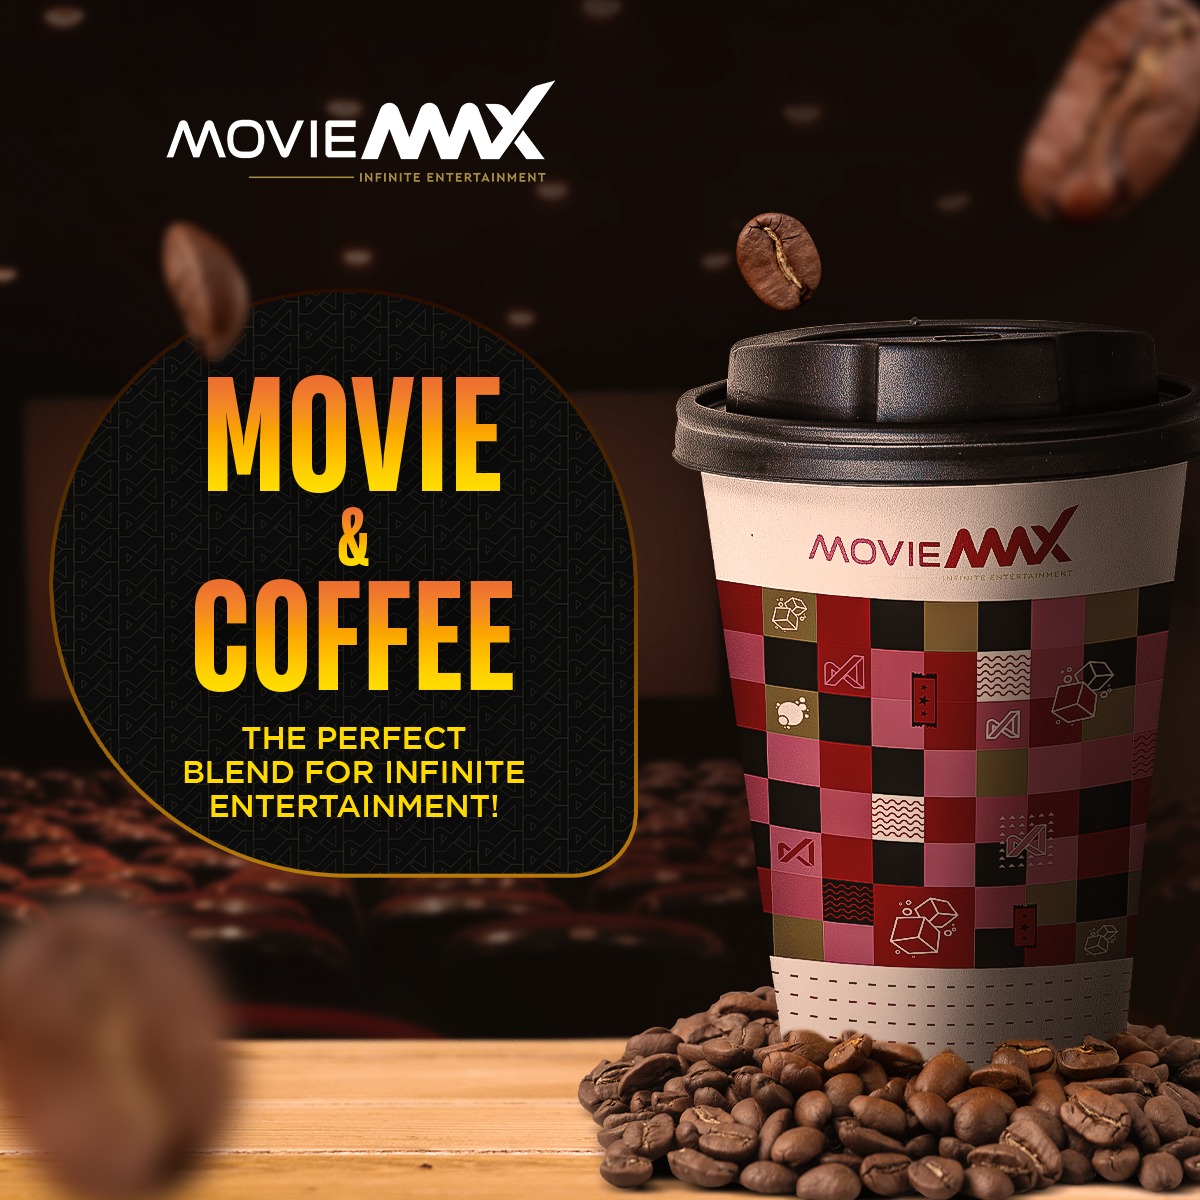 Movies and coffee, are the perfect blend of infinite entertainment! ☕️ Sip a cup of #MovieMax coffee and dive into a world of cinematic wonders. Every film is a new adventure waiting to unfold. 
.
.
#CoffeeAndMovies #MovieMaxFood #Cafe #MovieMaxCafe #MovieMaxCoffee #CoffeeLove